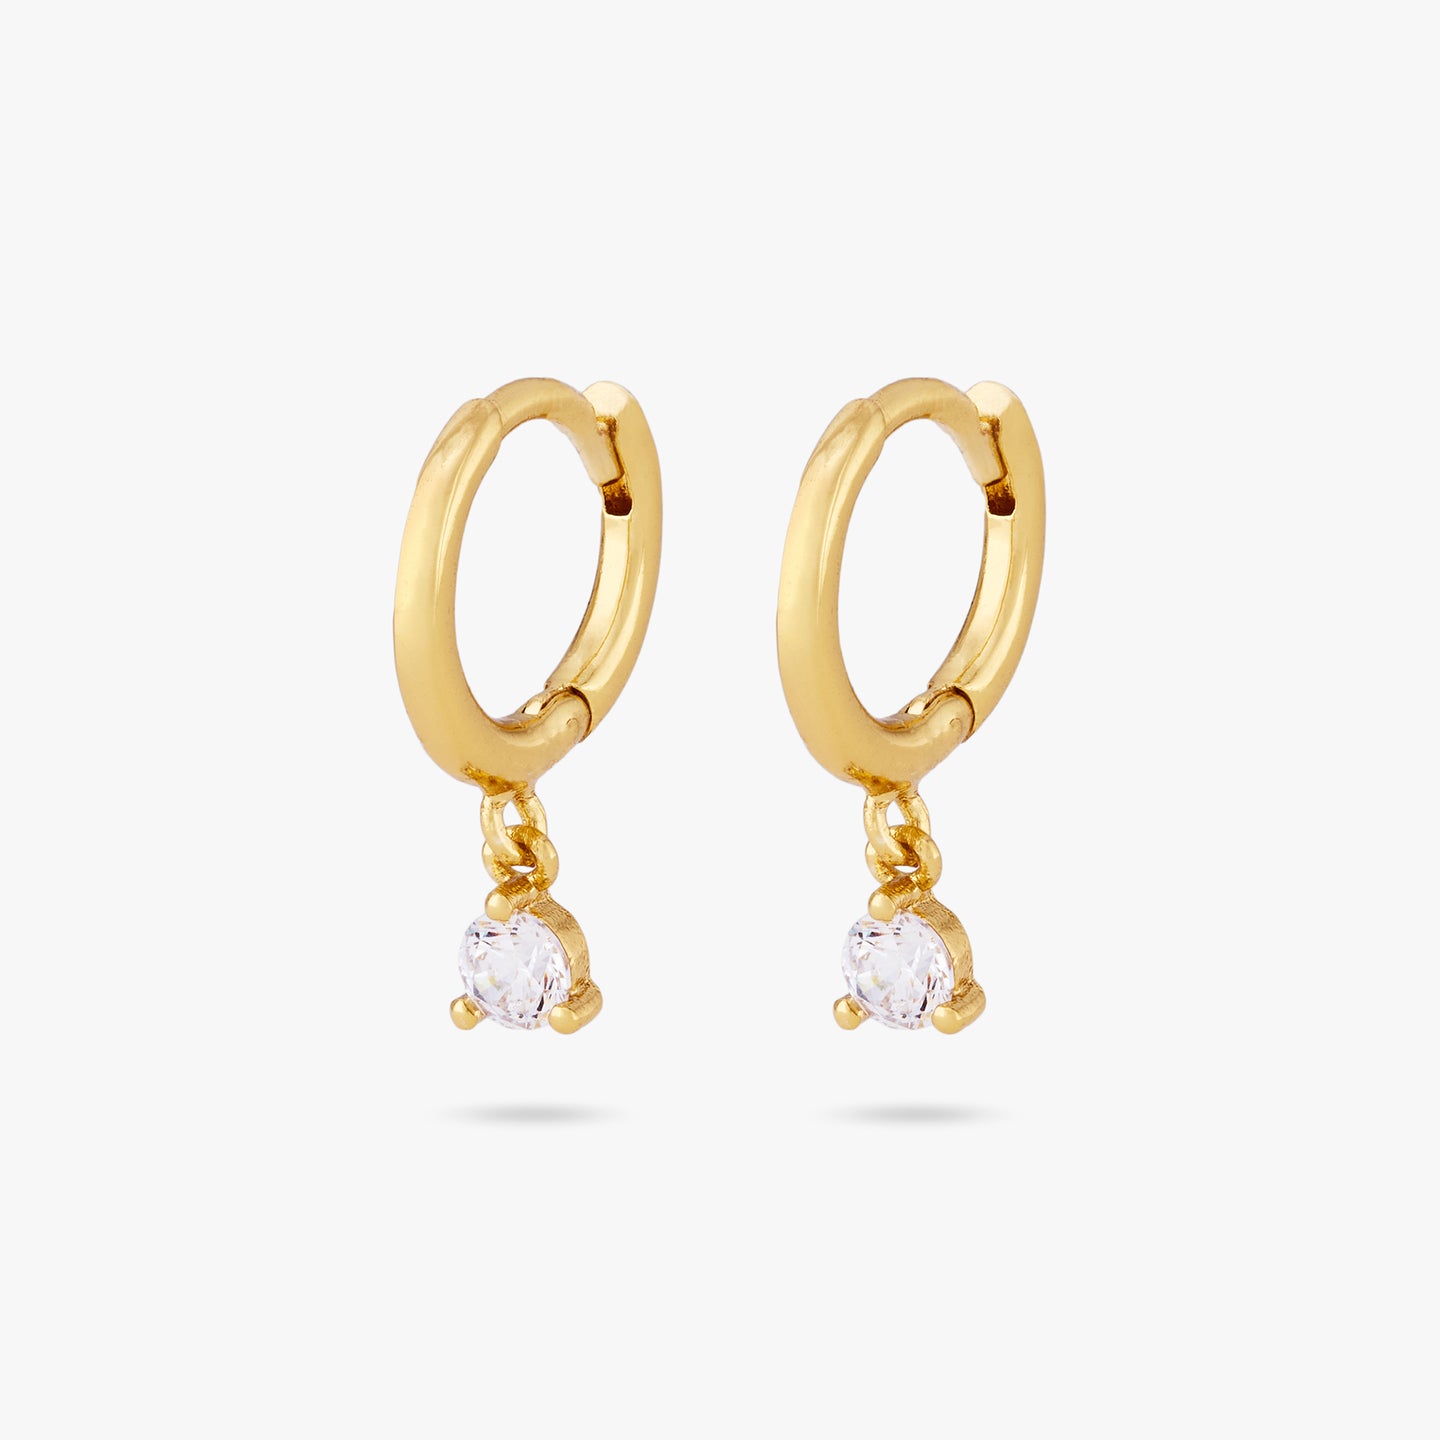 This is a pair of gold huggies with a cz stone dangling [pair] color:null|gold/clear